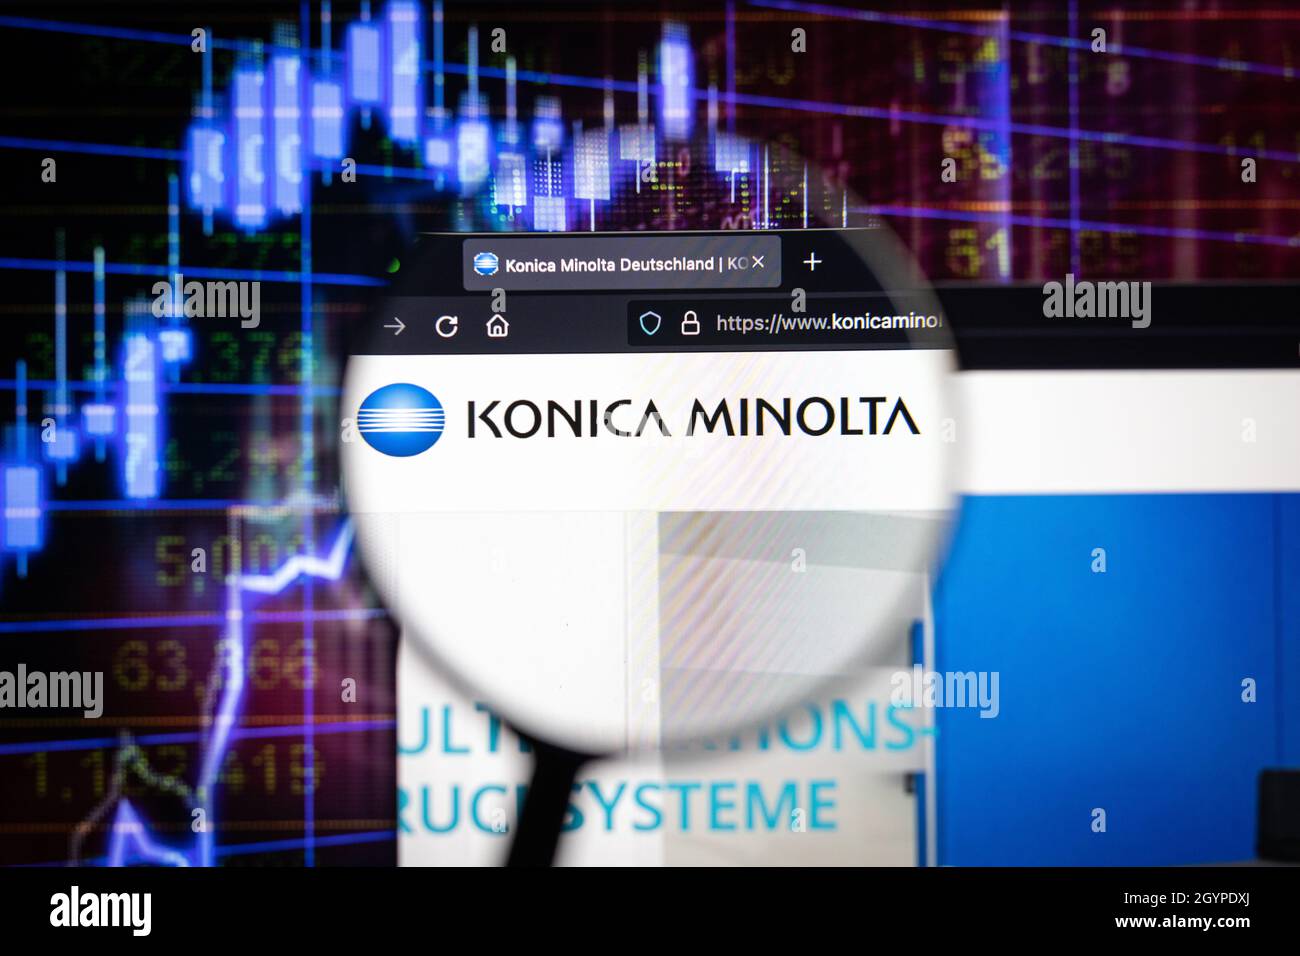 Konica Minolta company logo on a website with blurry stock market graphs in the background, seen on a computer screen through a magnifying glass. Stock Photo